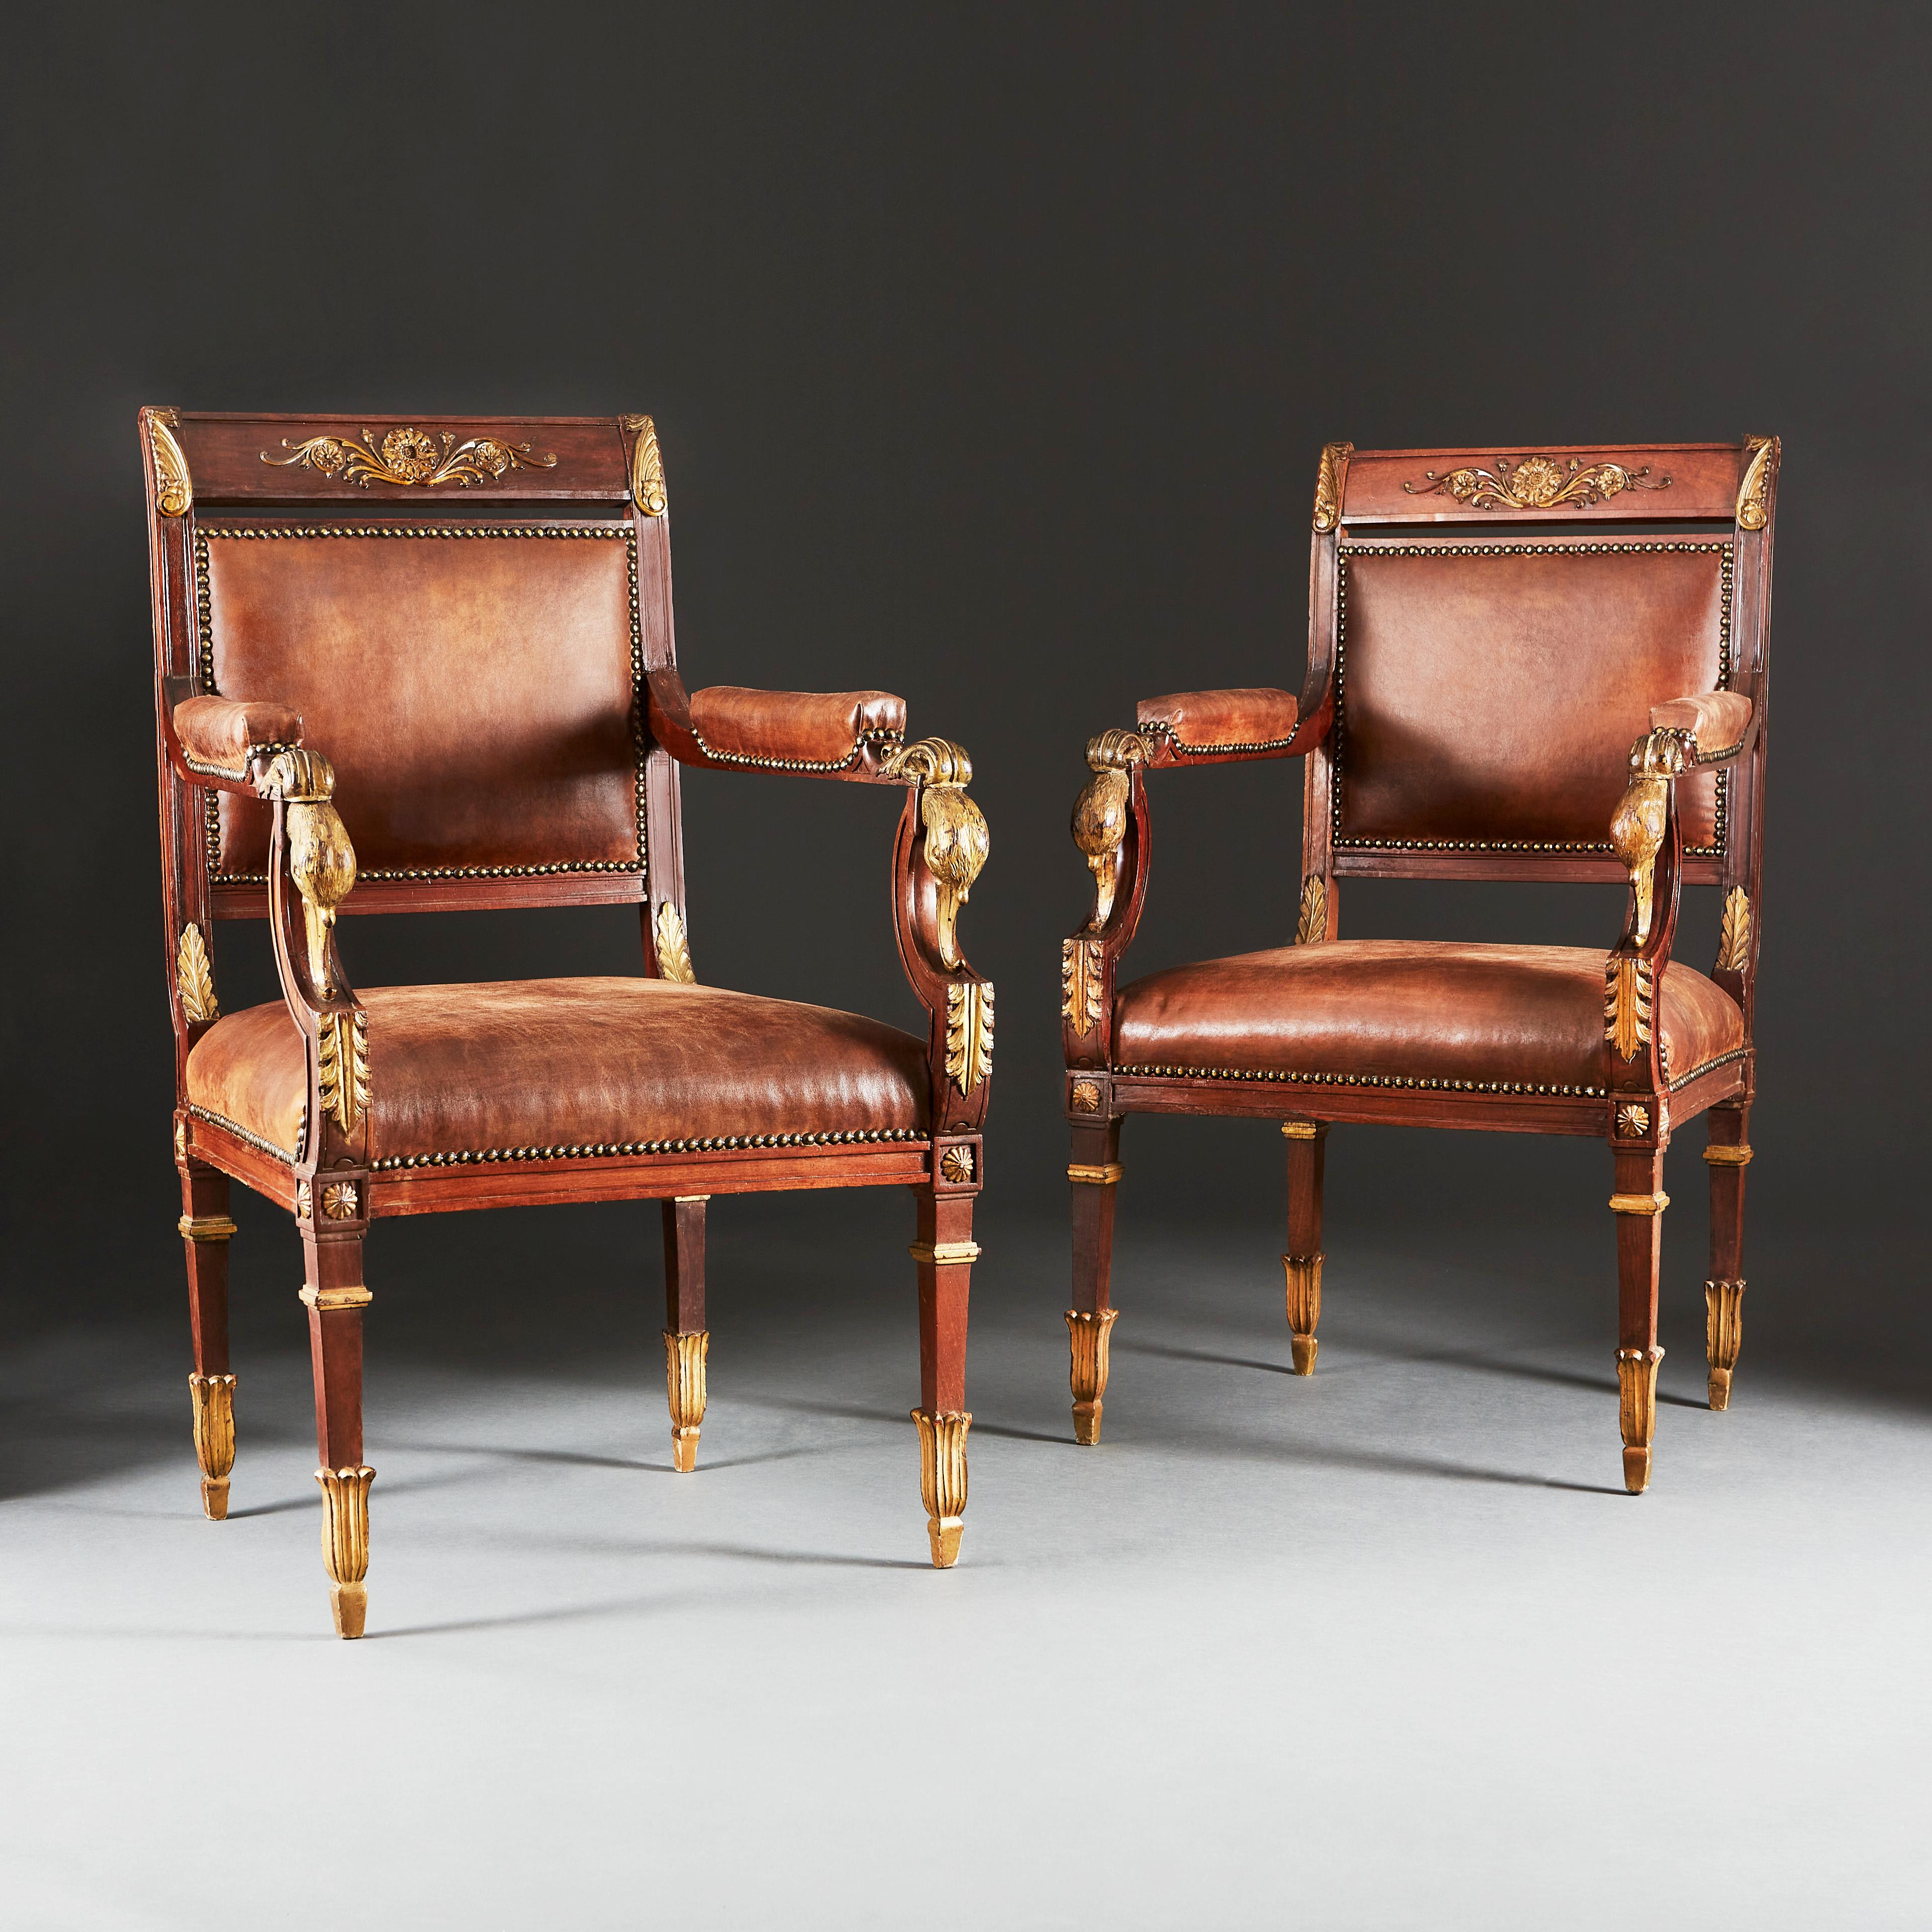 A pair of carved and gilded armchairs conceived in the Empire taste, the mahogany frames with carved and gilded swan heads to the arms and the signature Jansen rosette to the tops of the square tapering legs. The frames stamped multiple times with